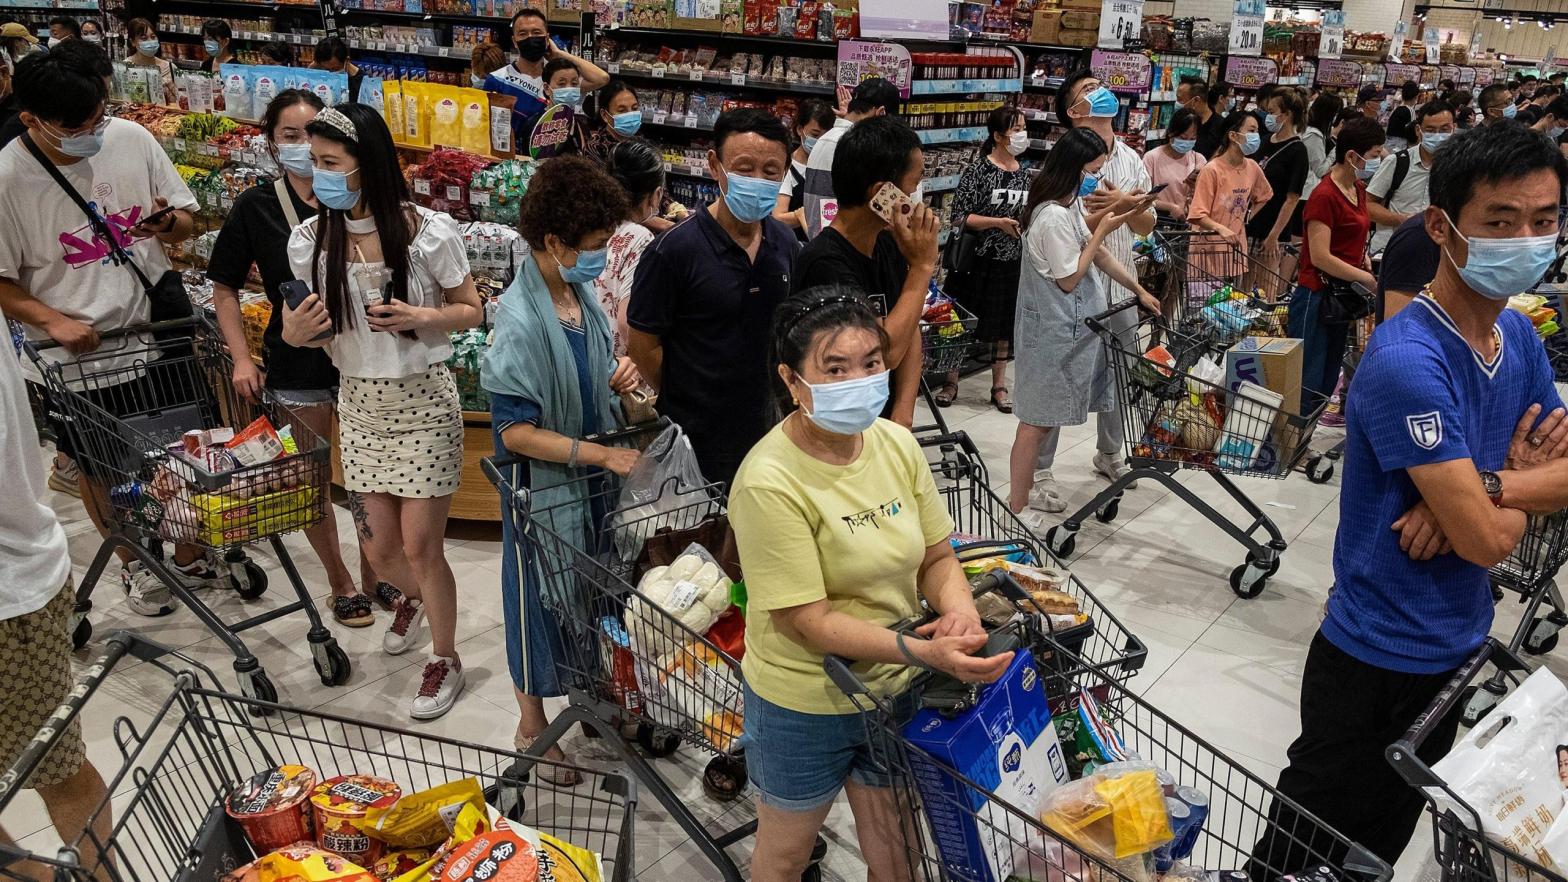 People line up to pay in a supermarket on August 2, 2021 in Wuhan, Hubei Province, China. (Photo: Getty Images, Getty Images)